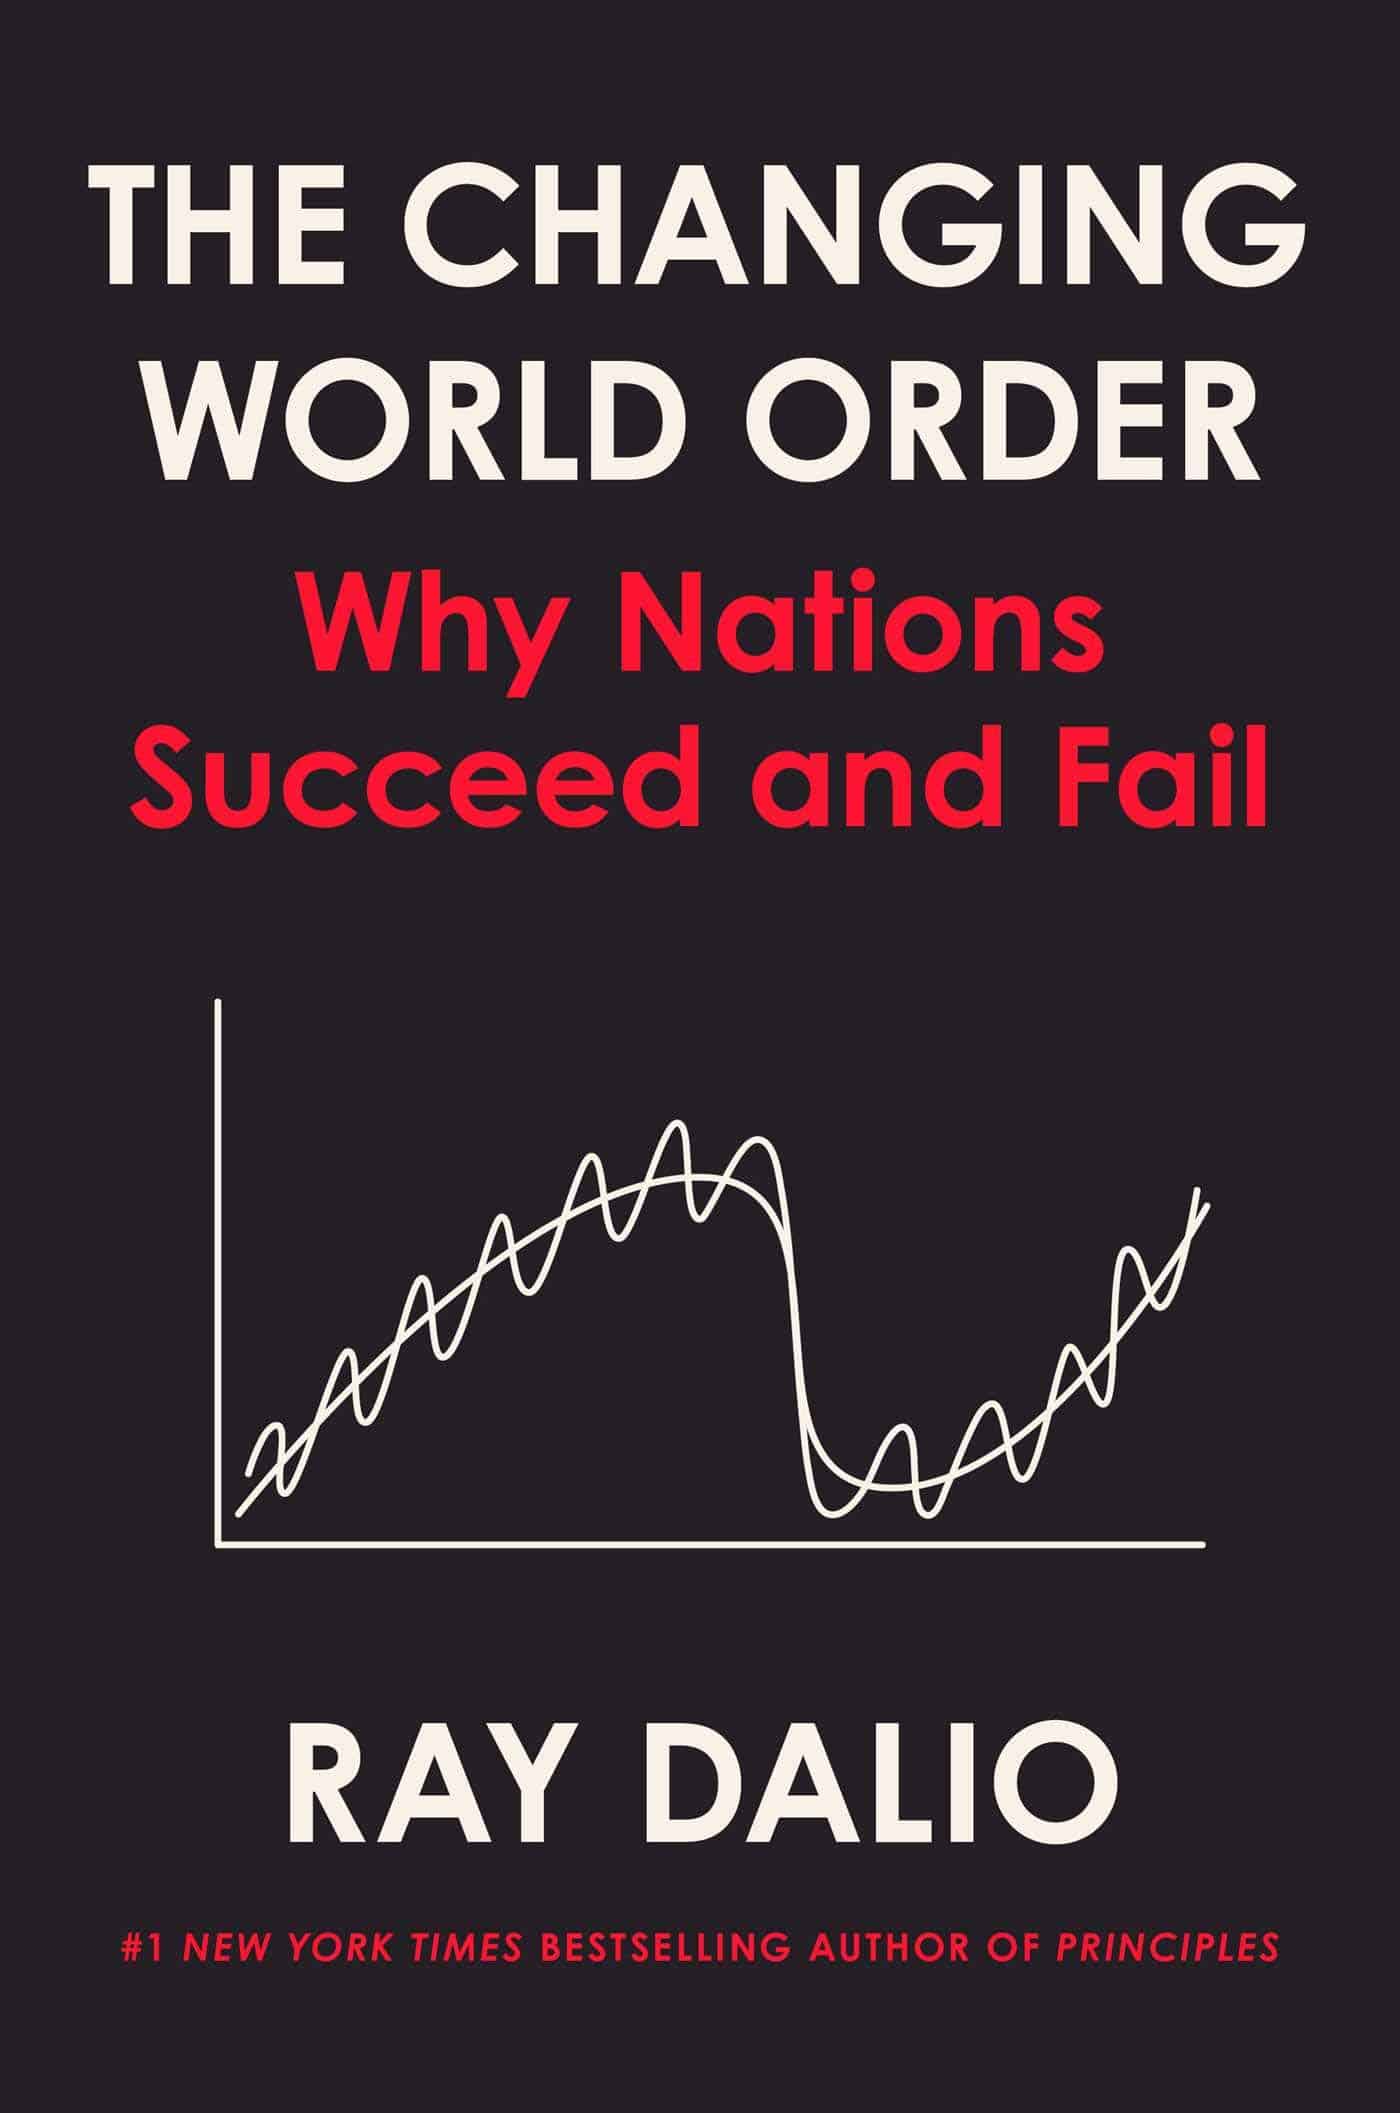 The Changing World Order: Why Nations Succeed and Fail: Dalio, Ray:  9781982160272: Amazon.com: Books